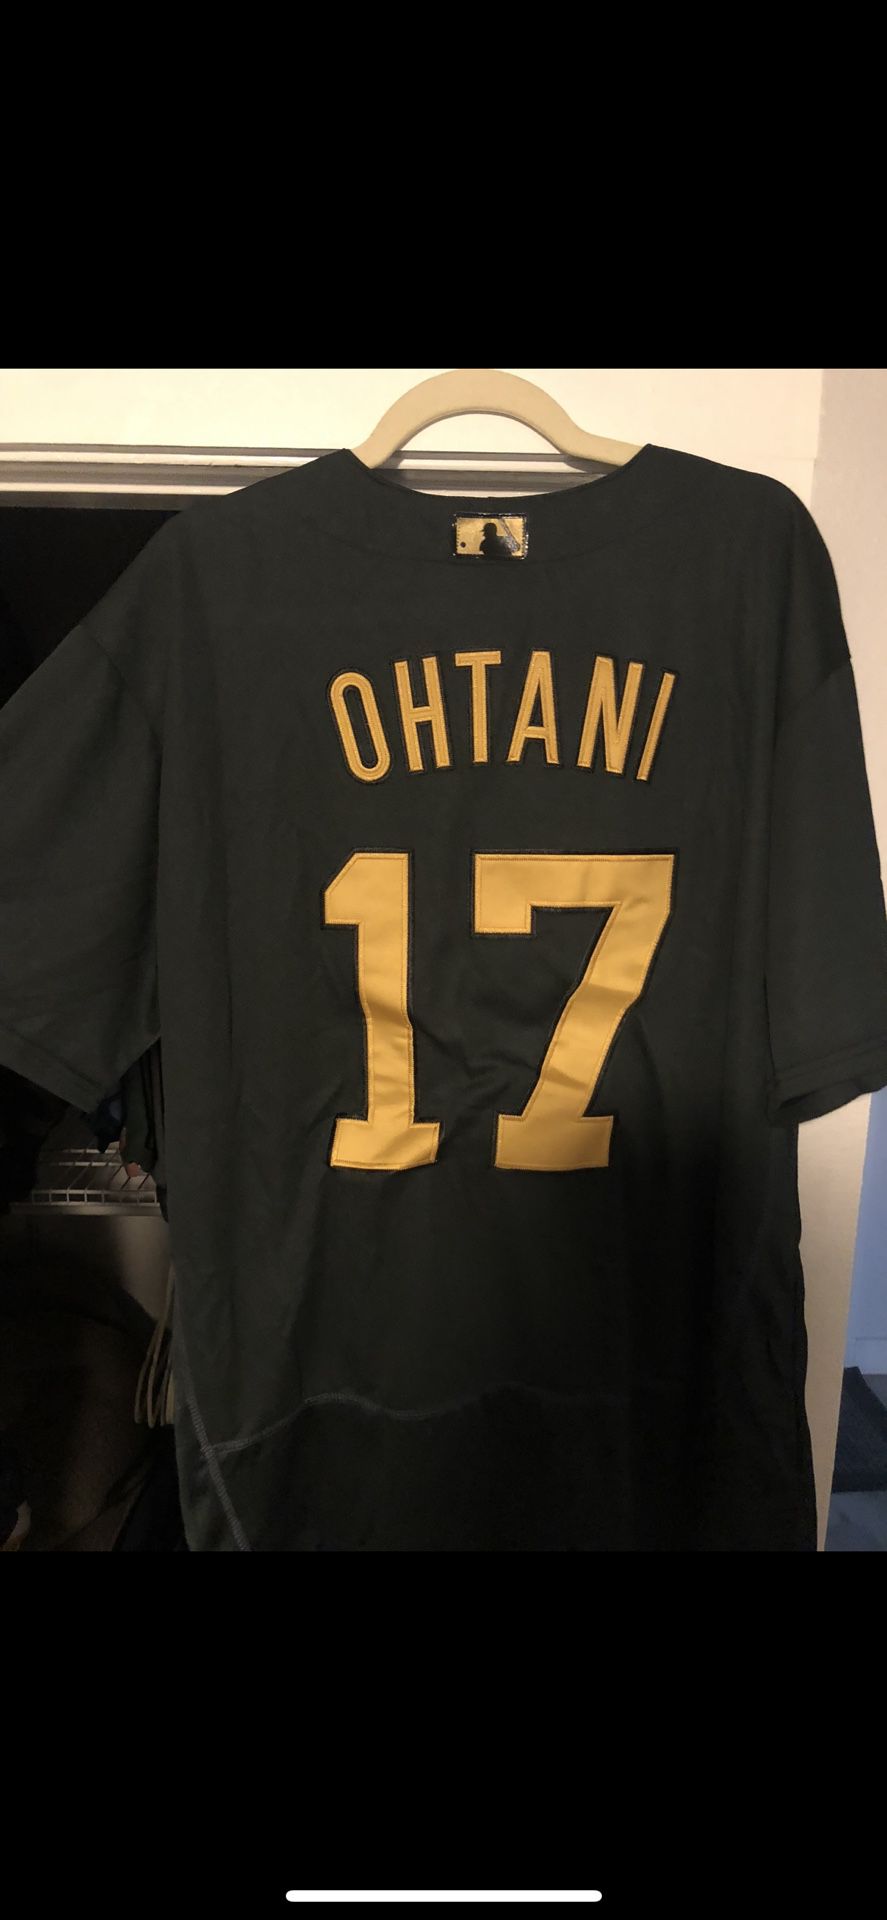 SHOHEI Ohtani Jersey Mens XL for Sale in Upland, CA - OfferUp